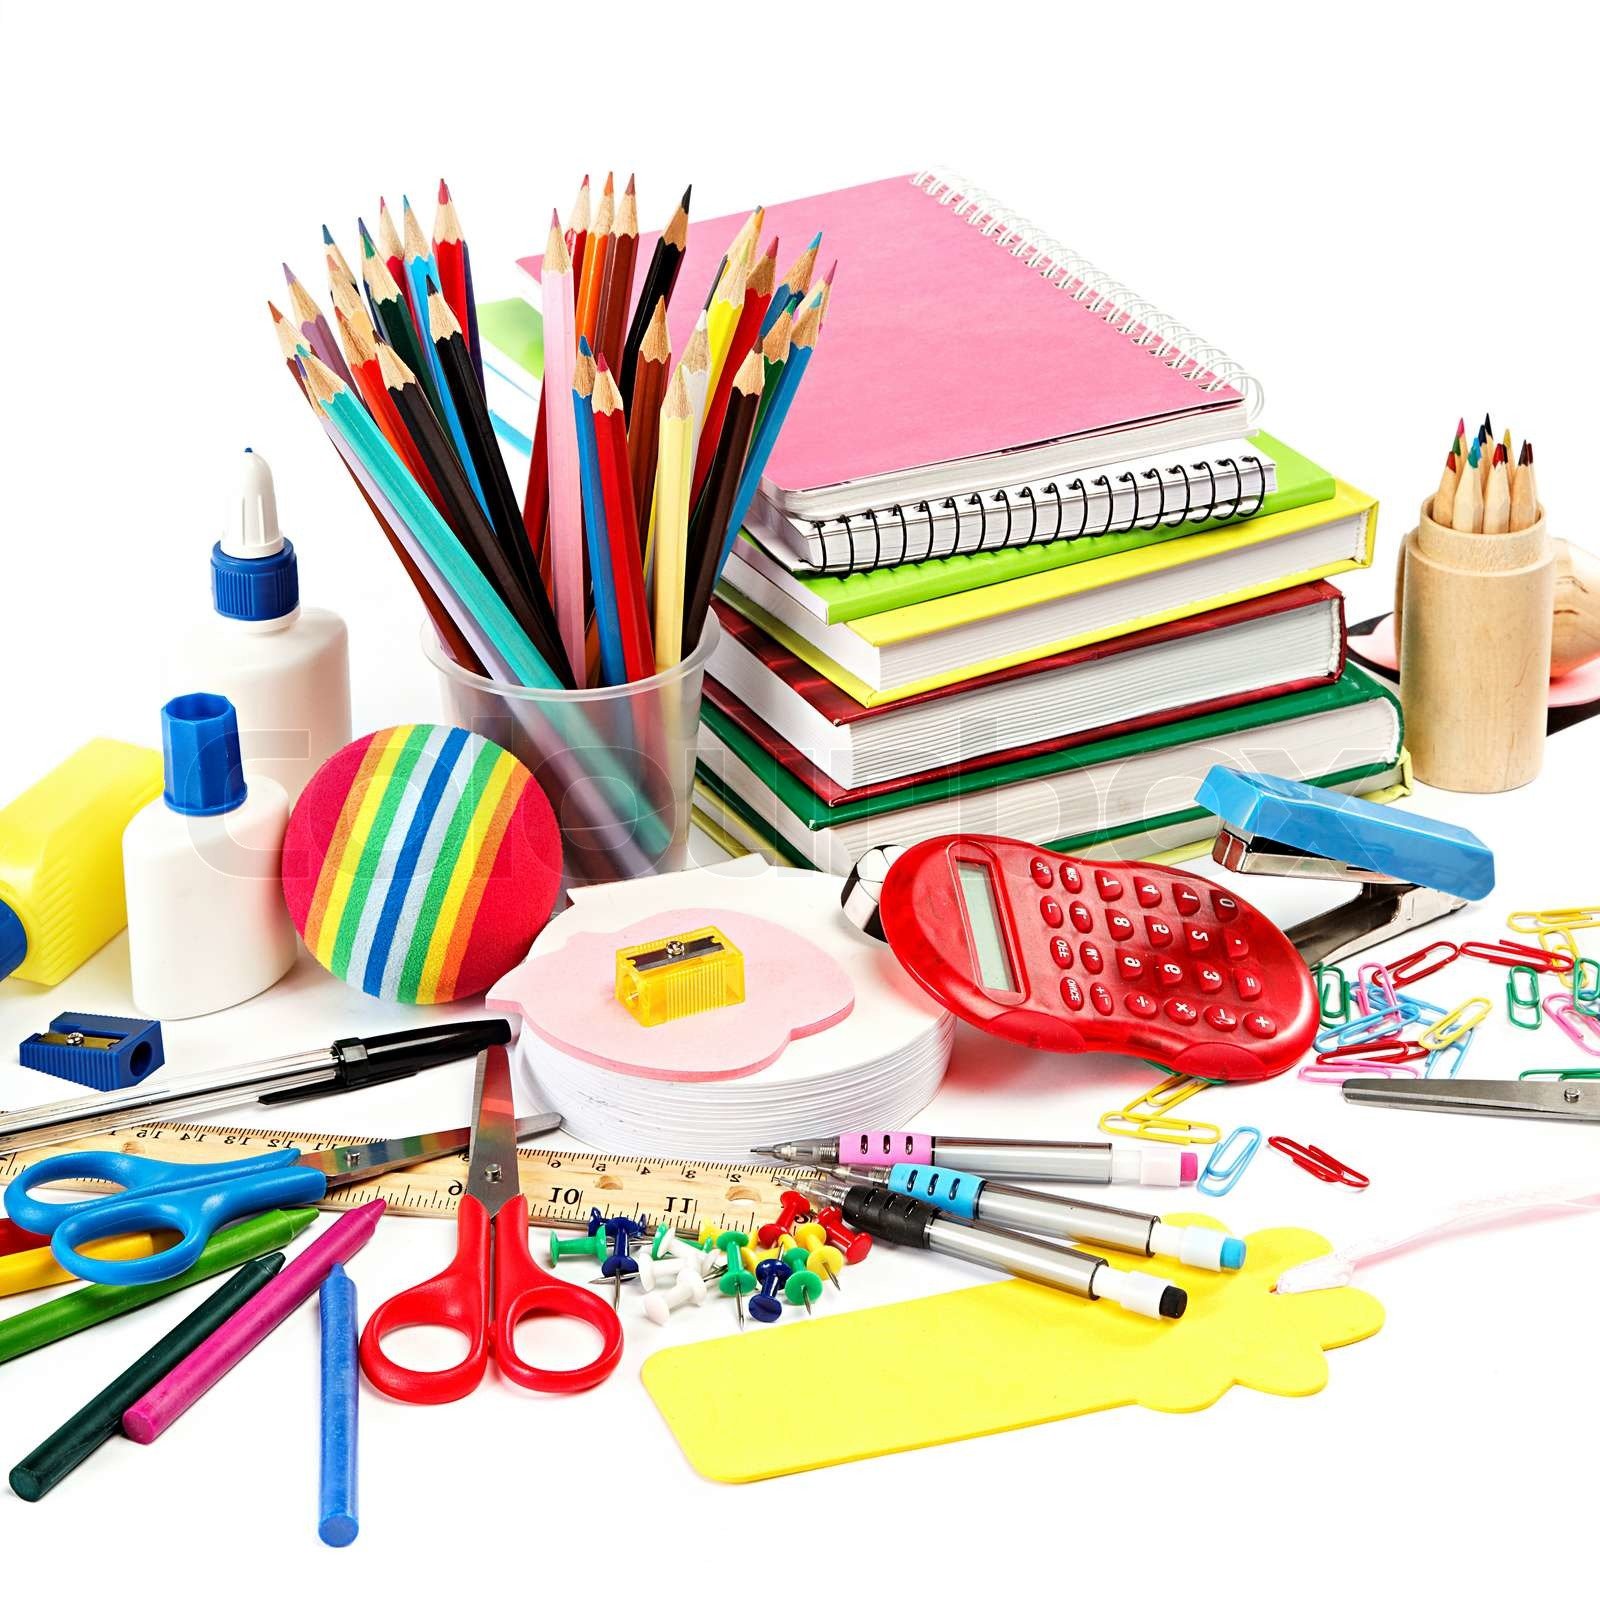 Stationery Manufacturer from China: All You Need to Know